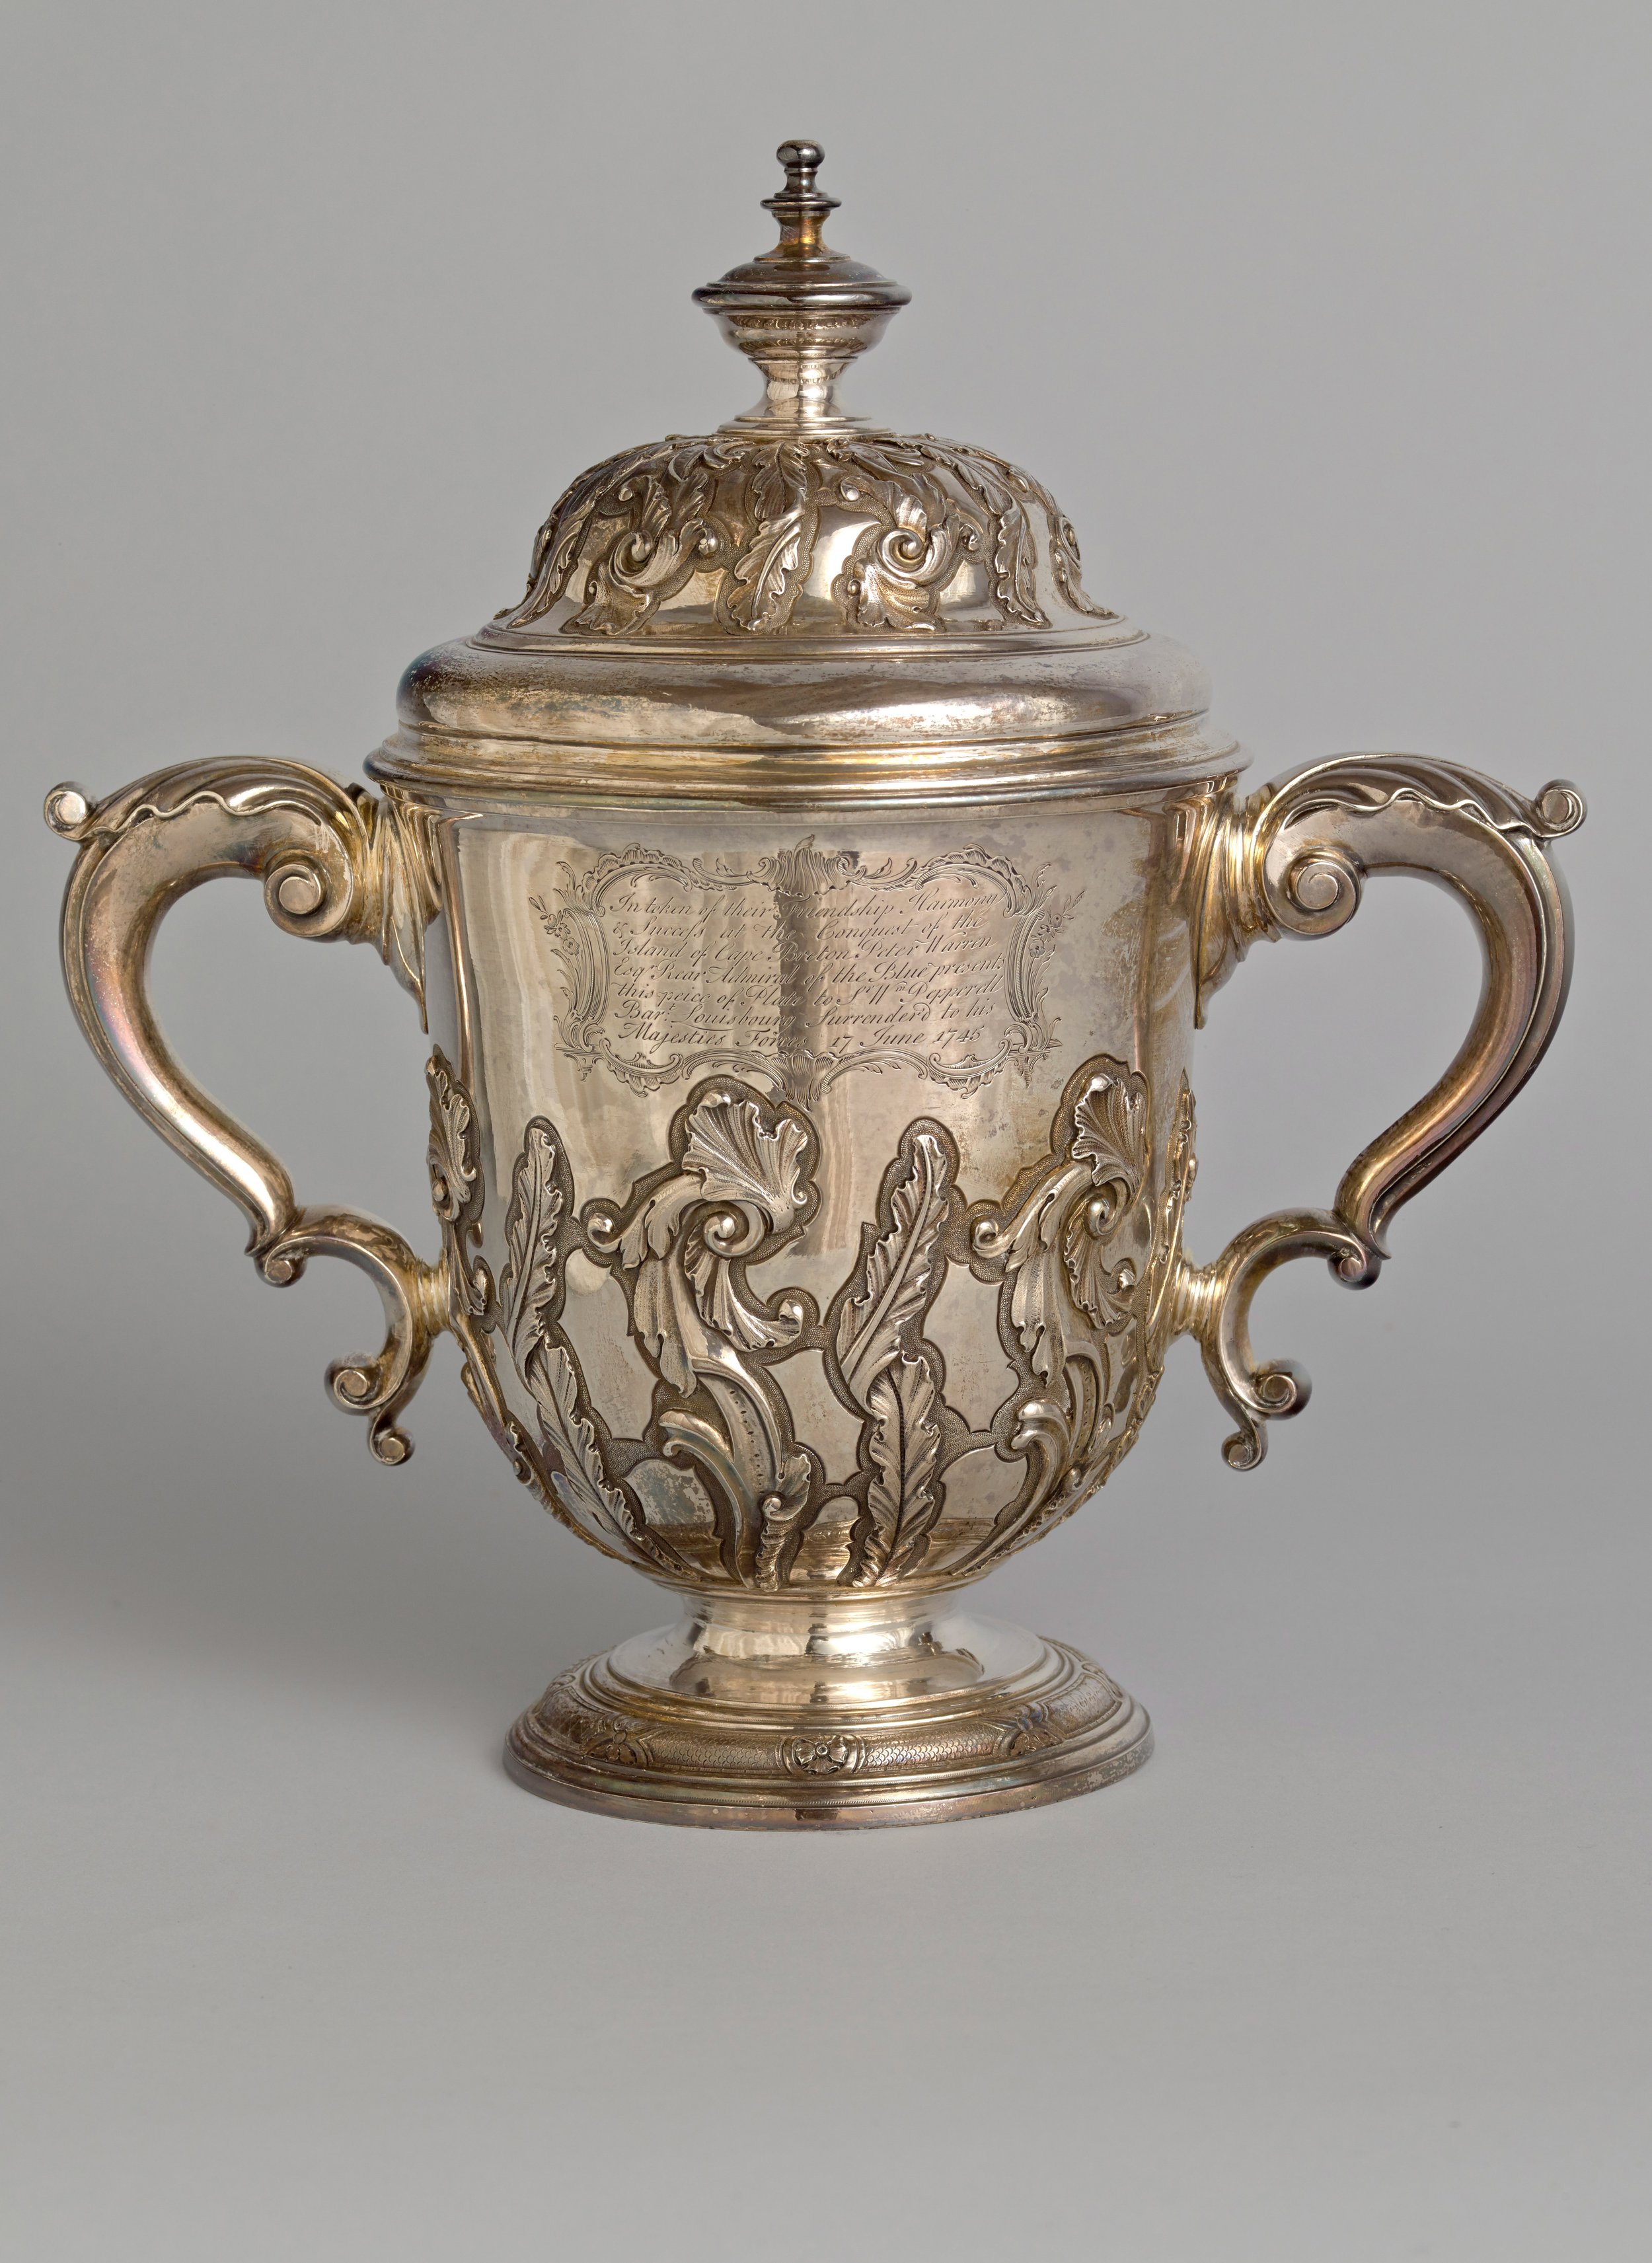   Pezé Pilleau  England, 1696–1776  Ceremonial Grace Cup of Pepperrell Silver , 1740–1745  silver, 12 x 10 1/2 x 6 1/8 inches Museum purchase with gifts from Mr. and Mrs. Joseph William Pepperell Frost, estate of William P. Palmer III, and five anony